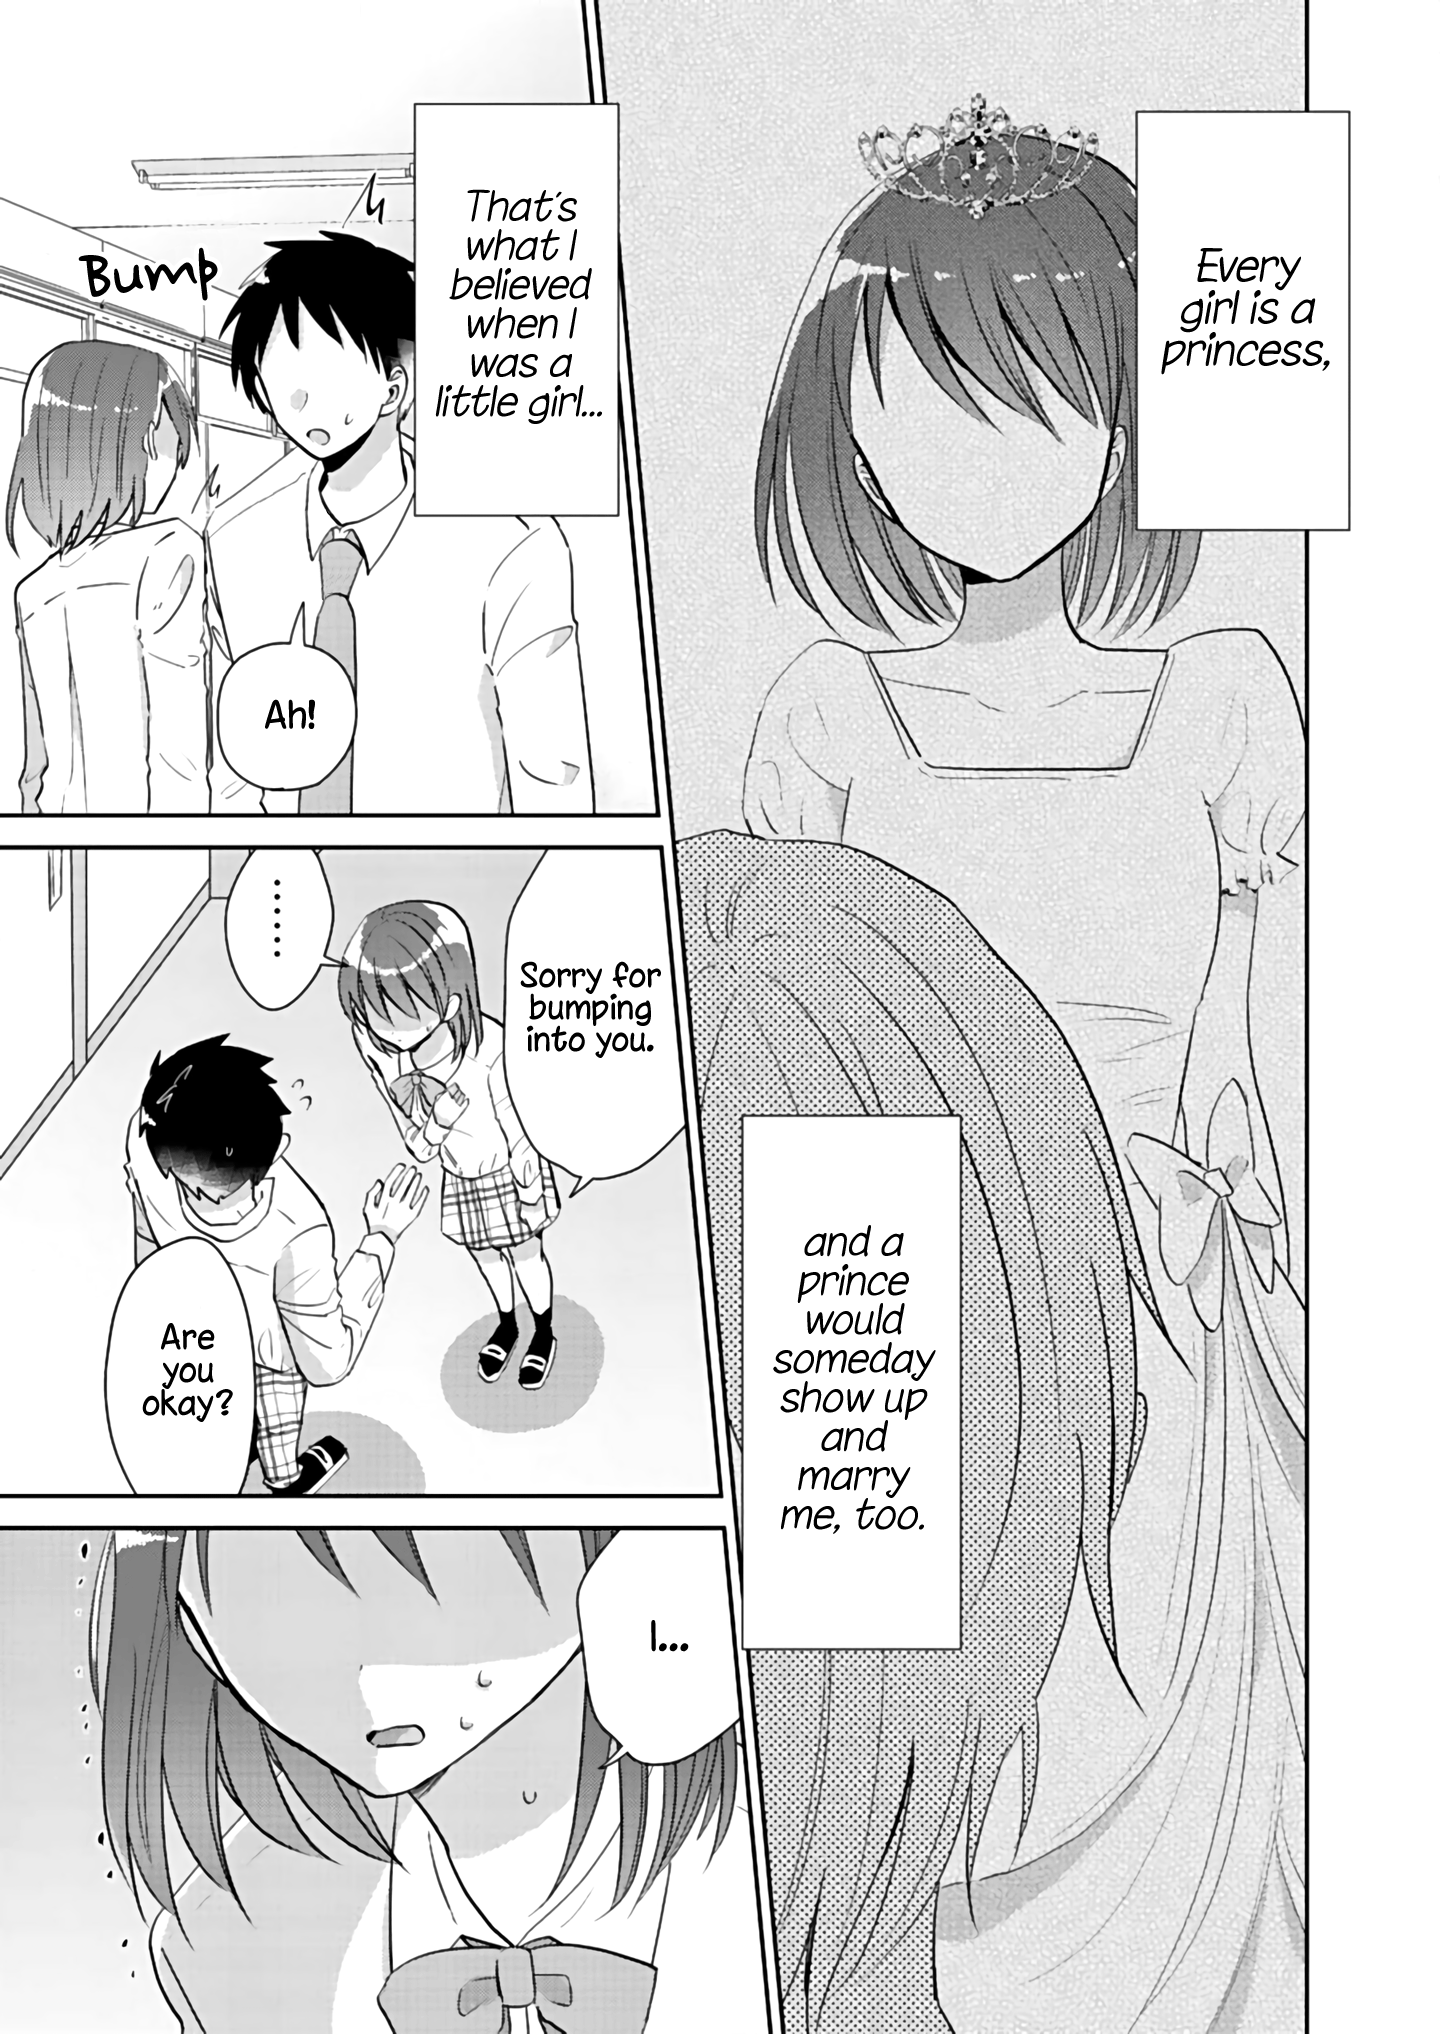 How To Start A Relationship With Crossdressing - Page 2